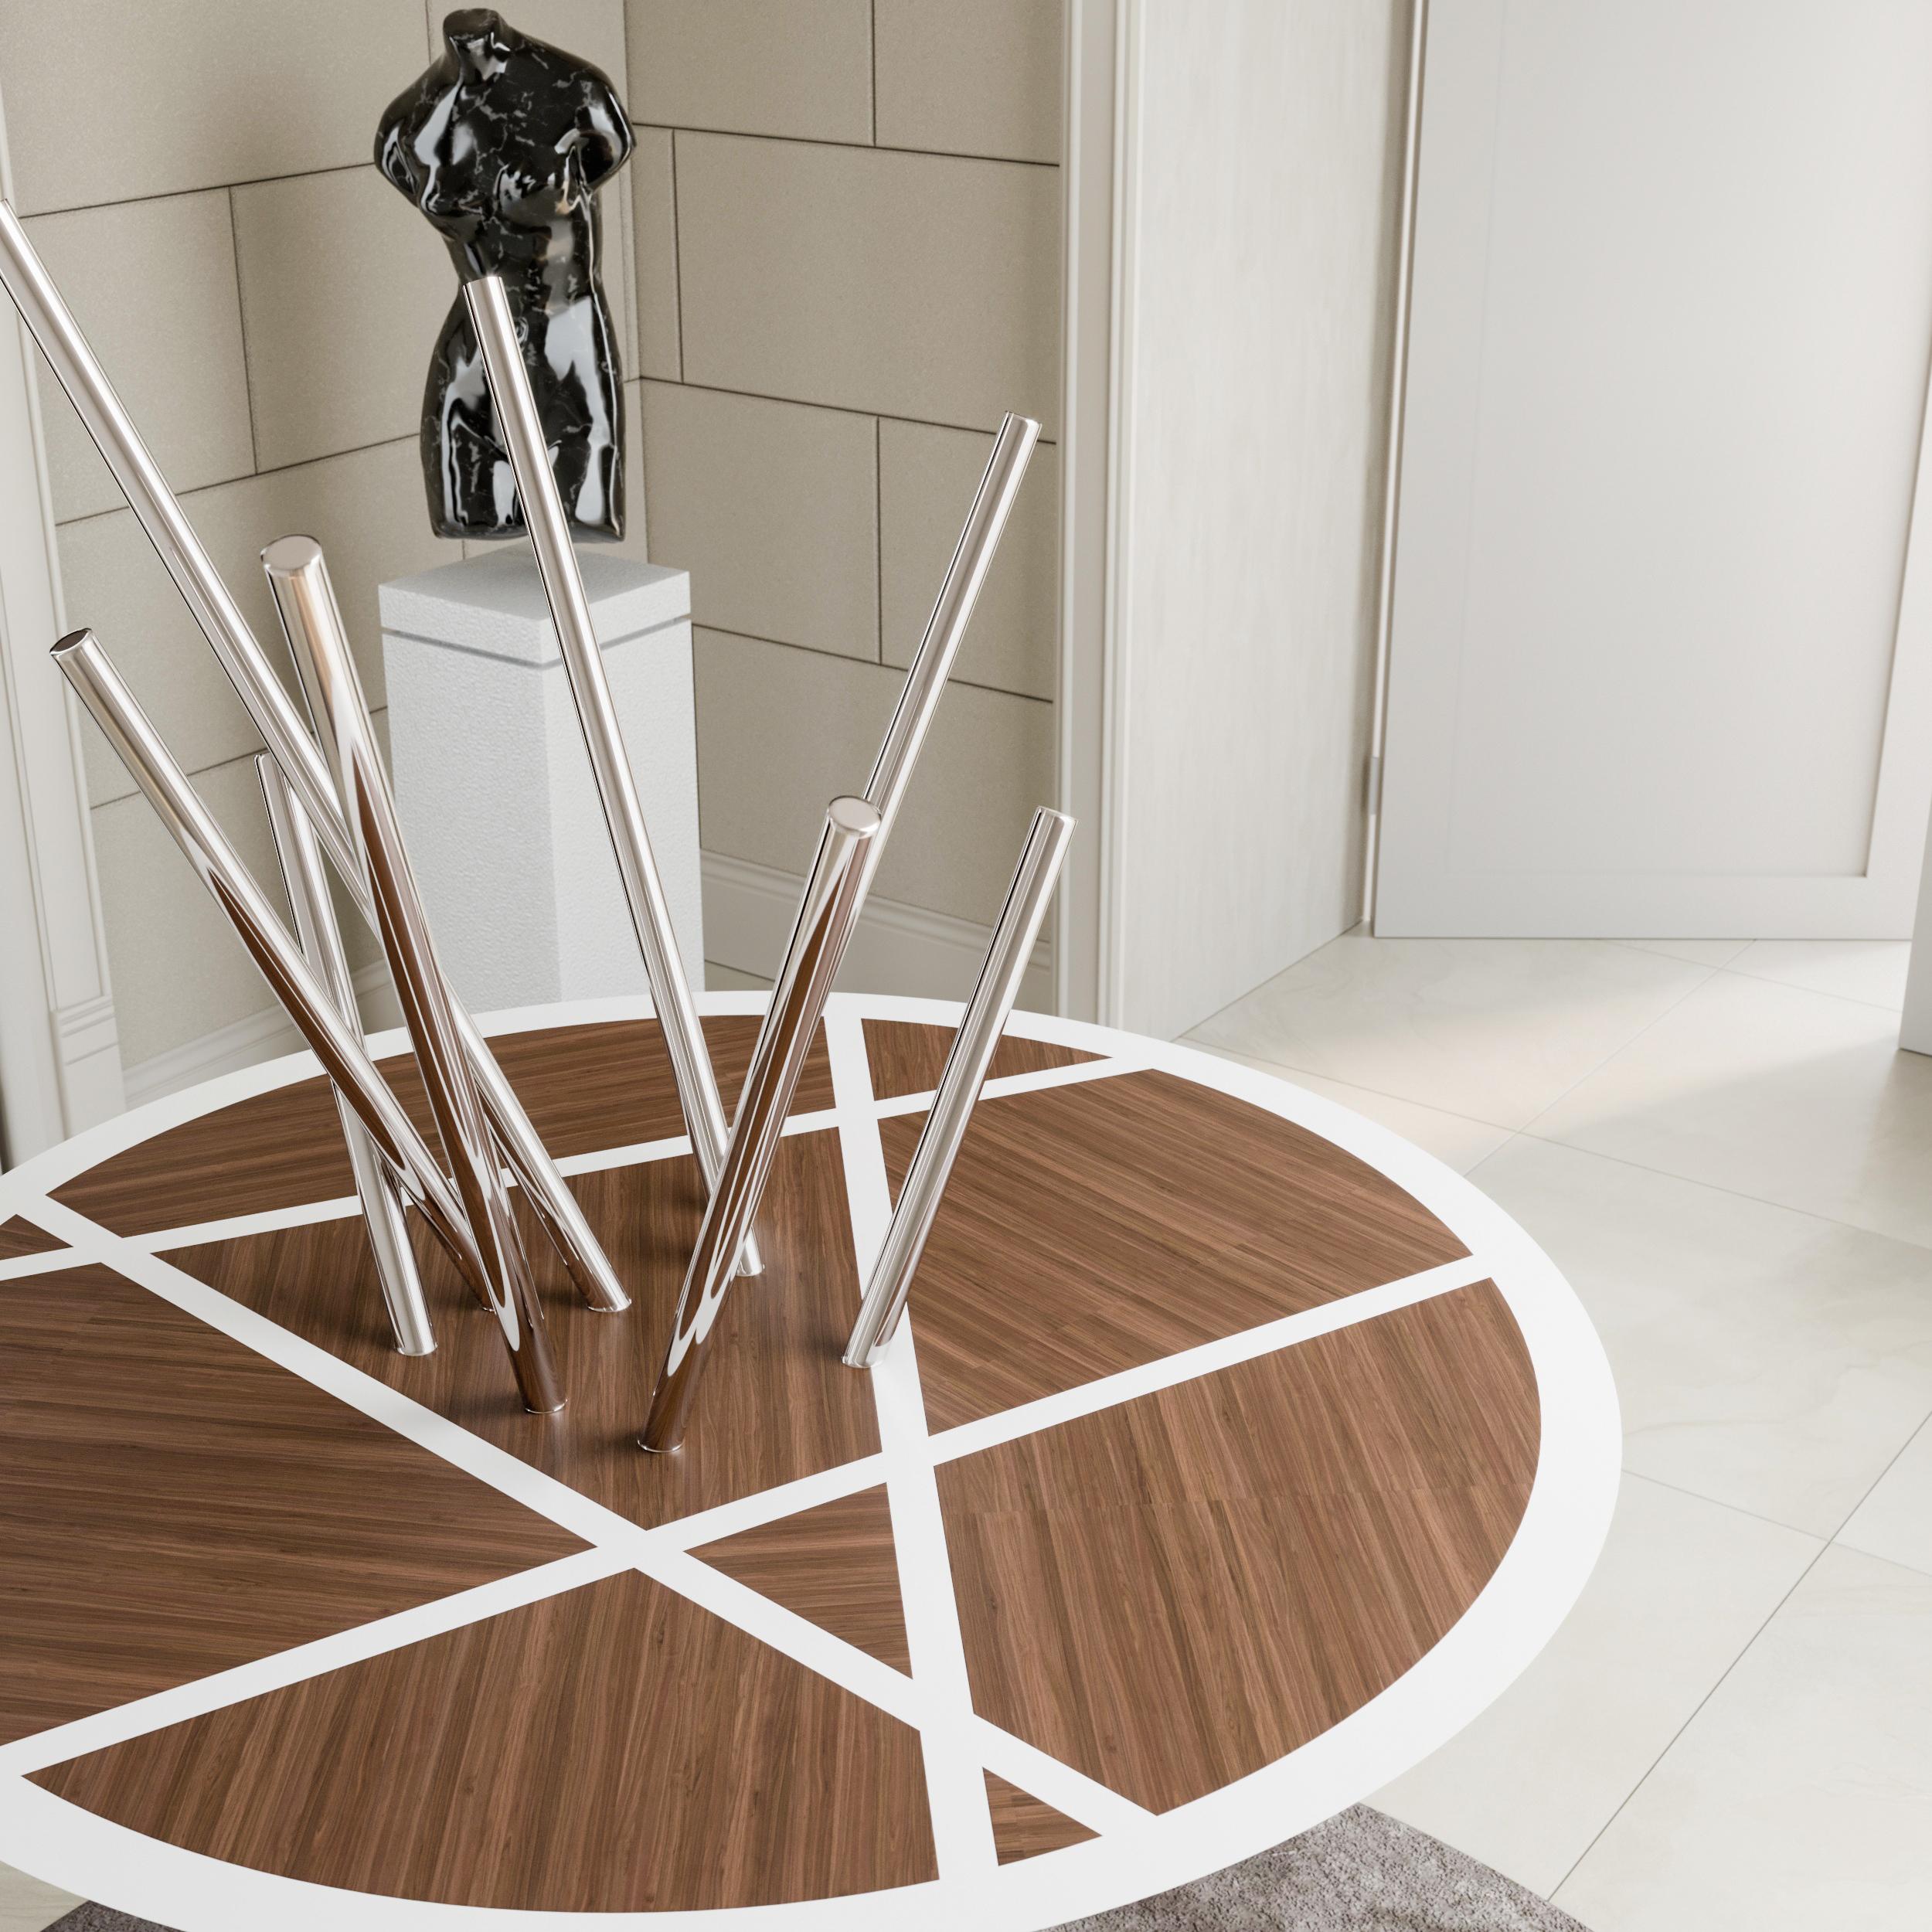 The Modernity Round Pedestal Table Walnut Wood White Lacquer Brushed Stainless Steel (en anglais) en vente 1